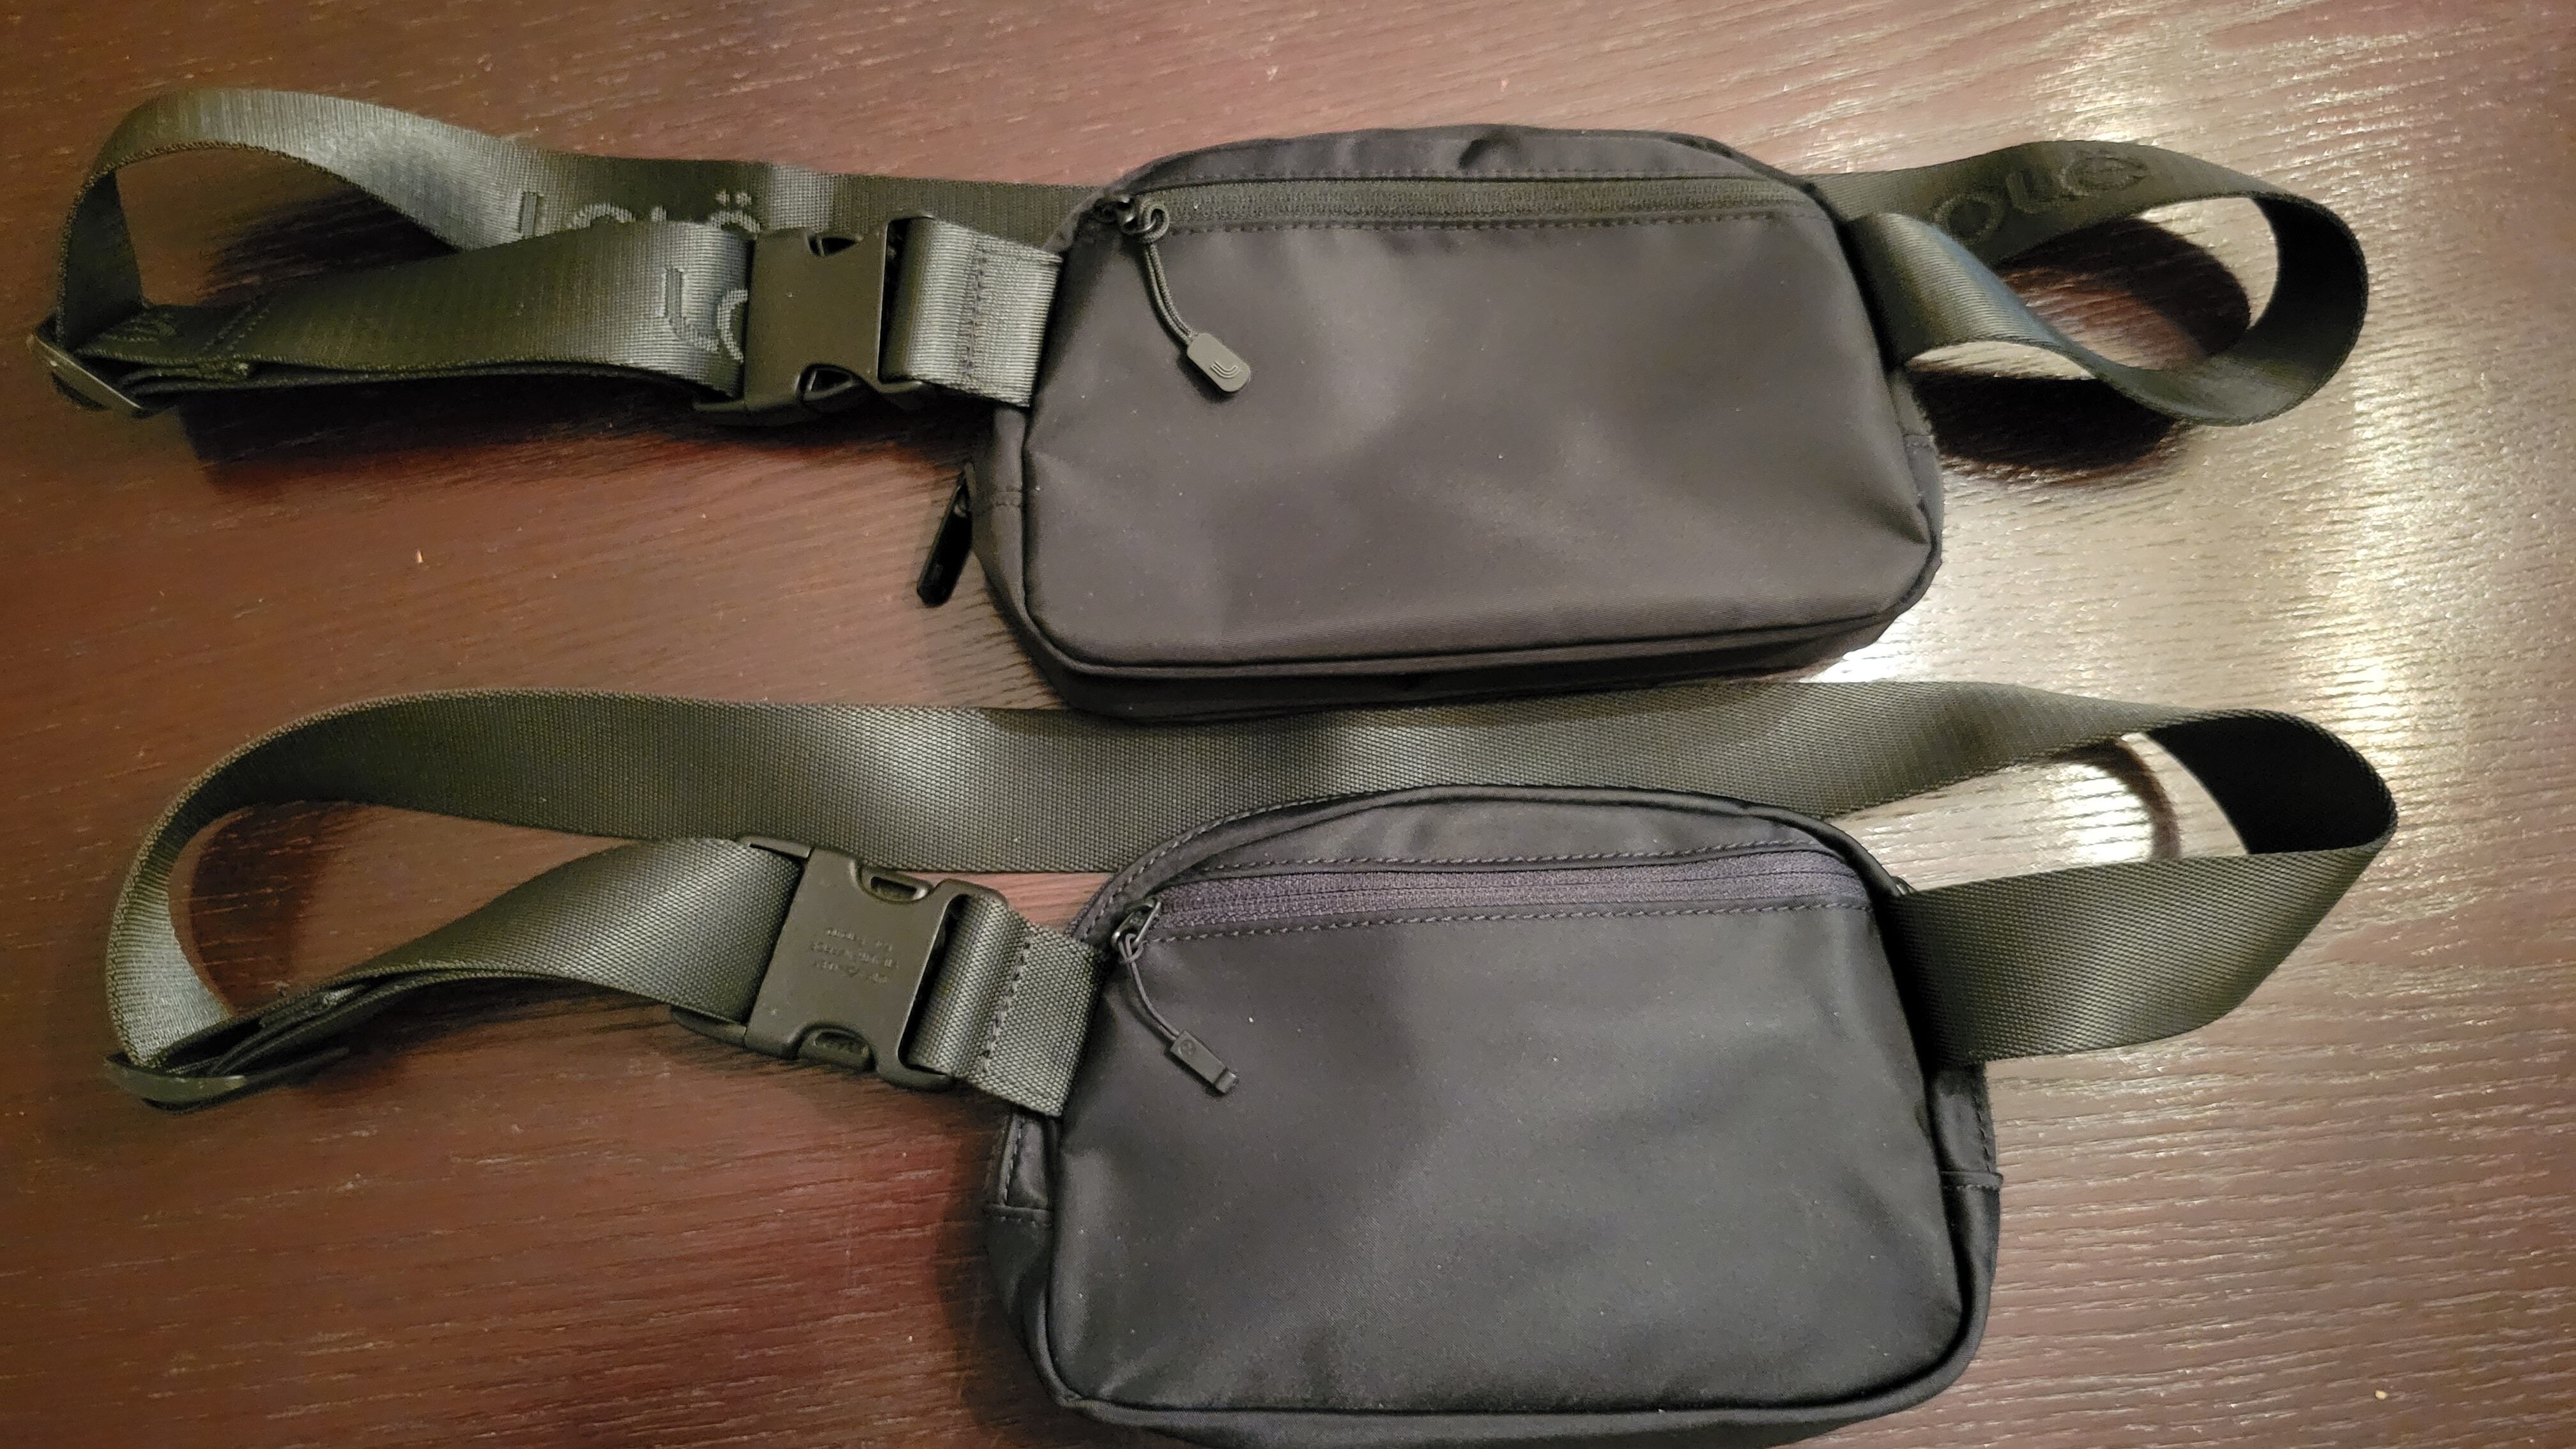 The Lole belt bag found at Costco is a great dupe for the hard-to